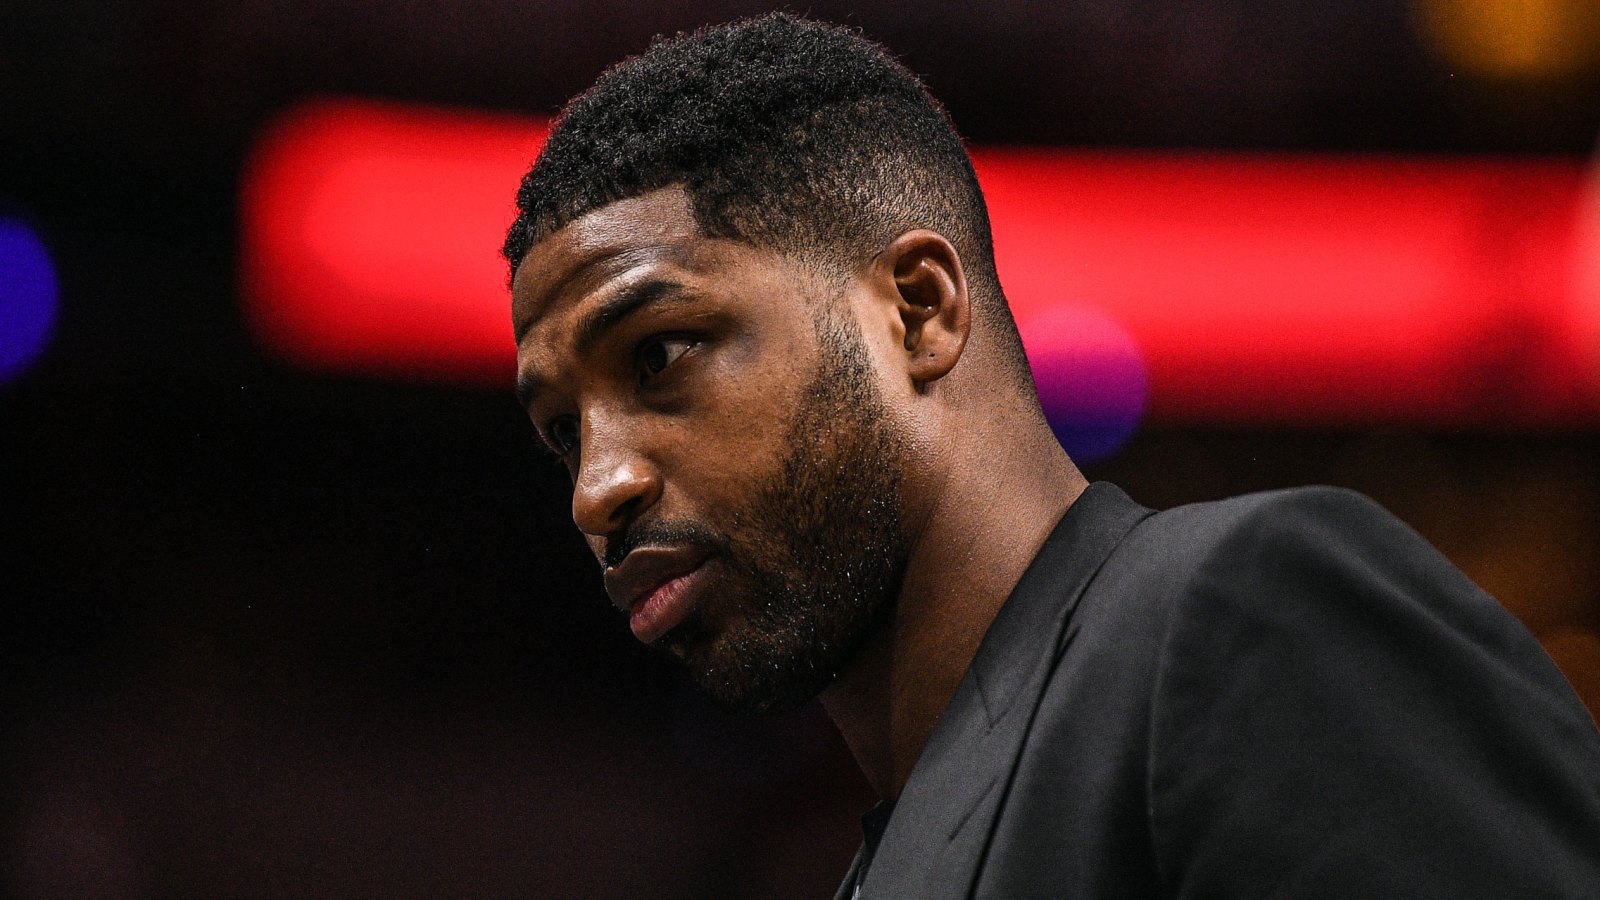 Tristan Thompson Listens to Song About Taking 'Secrets' to the 'Grave'